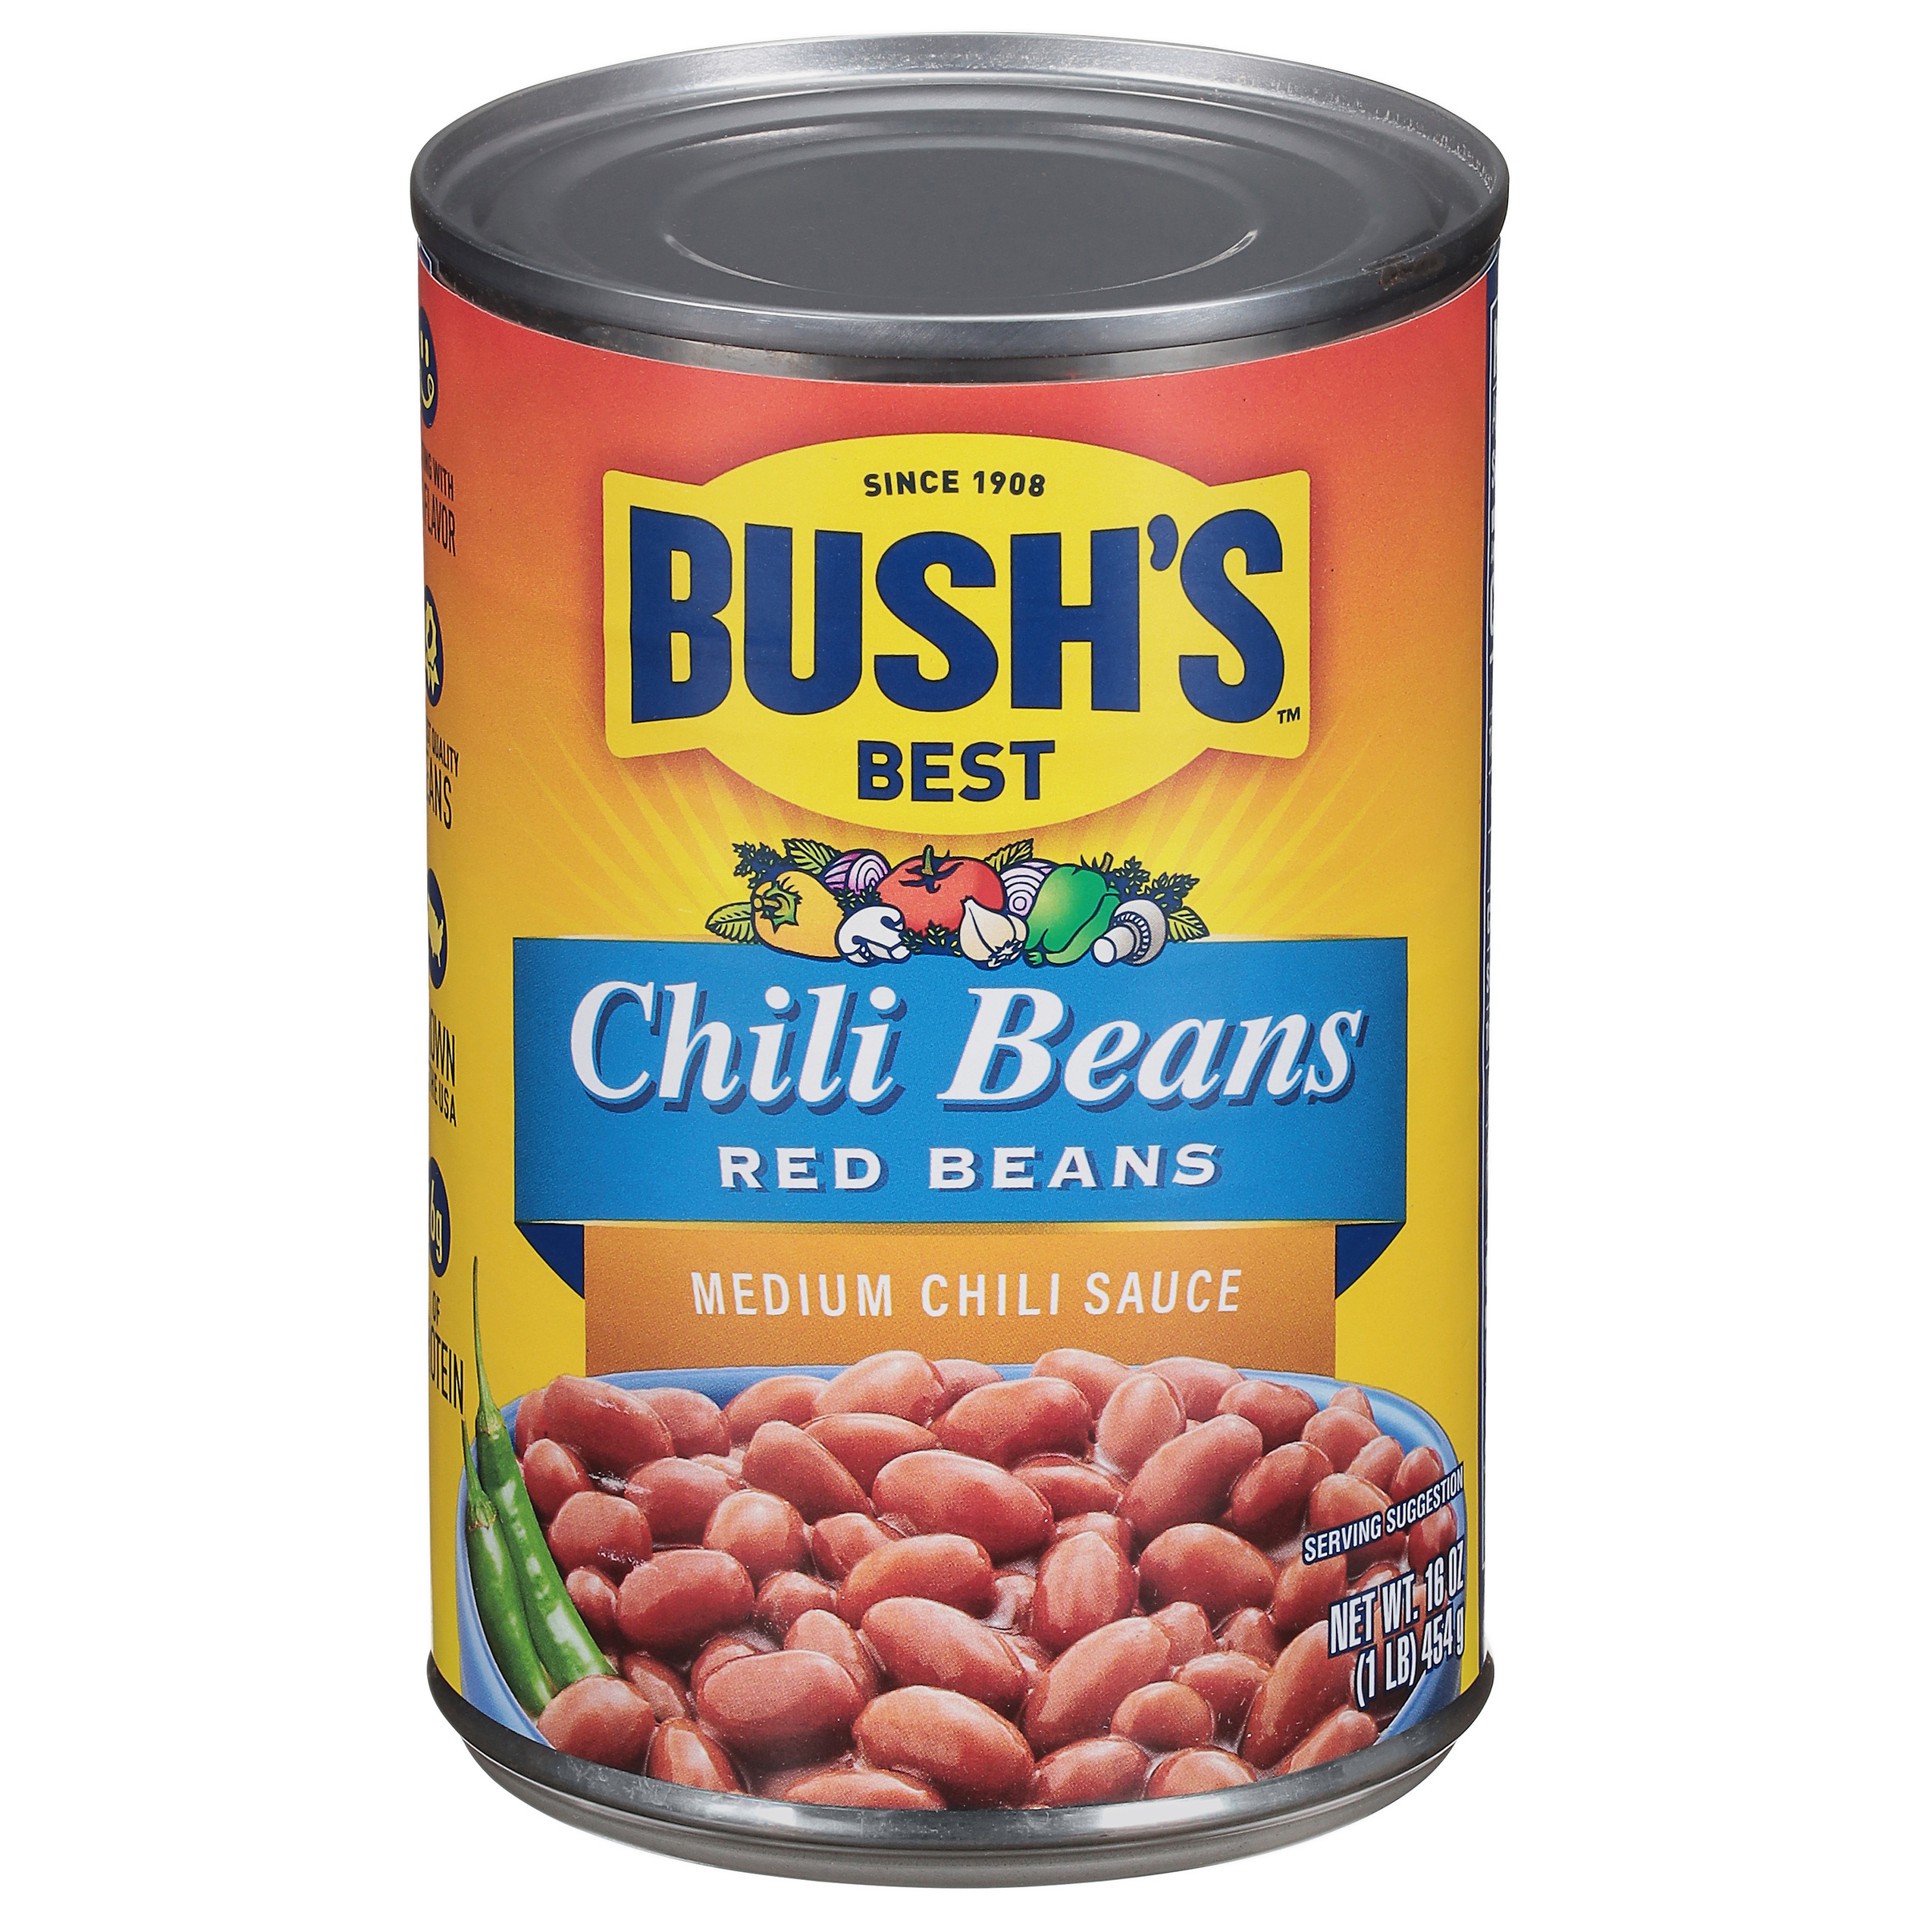 slide 3 of 5, Bush's Best Chili Beans Red Beans in a Medium Chili Sauce 16 oz. Can, 16 oz